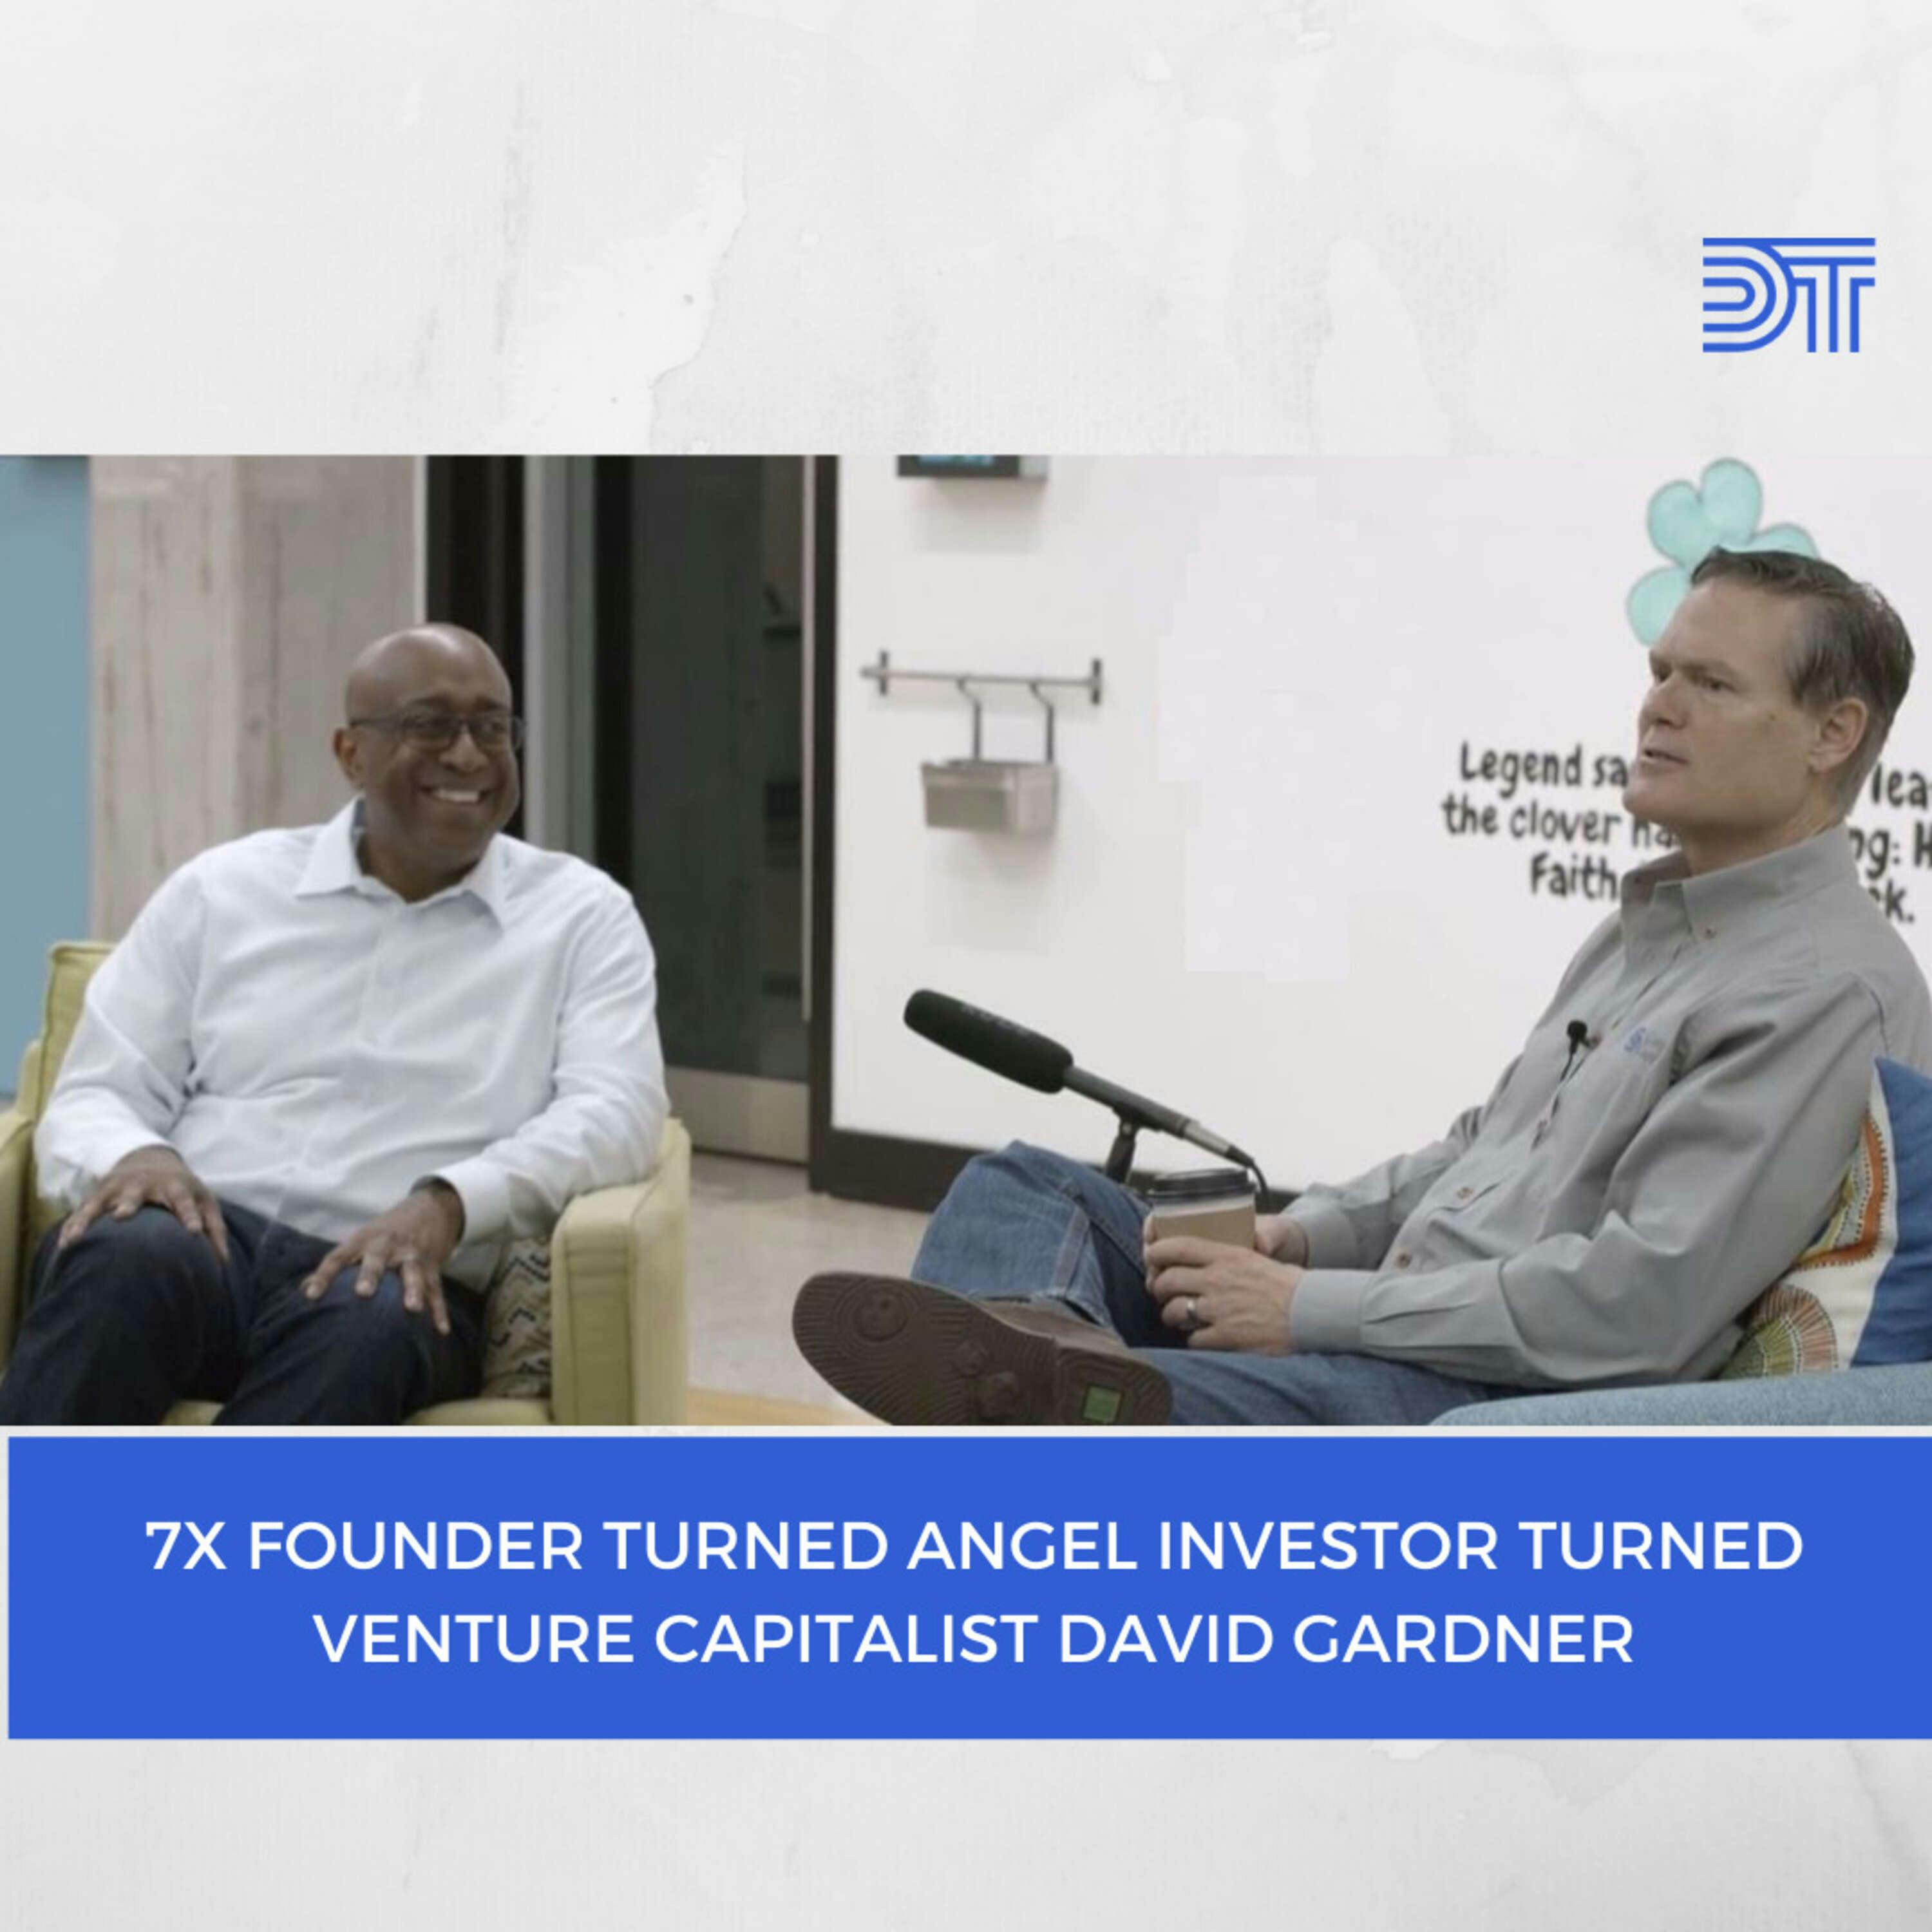 7X Founder Turned Venture Capitalist David Gardner Invests in the Entrepreneur, Not the Idea